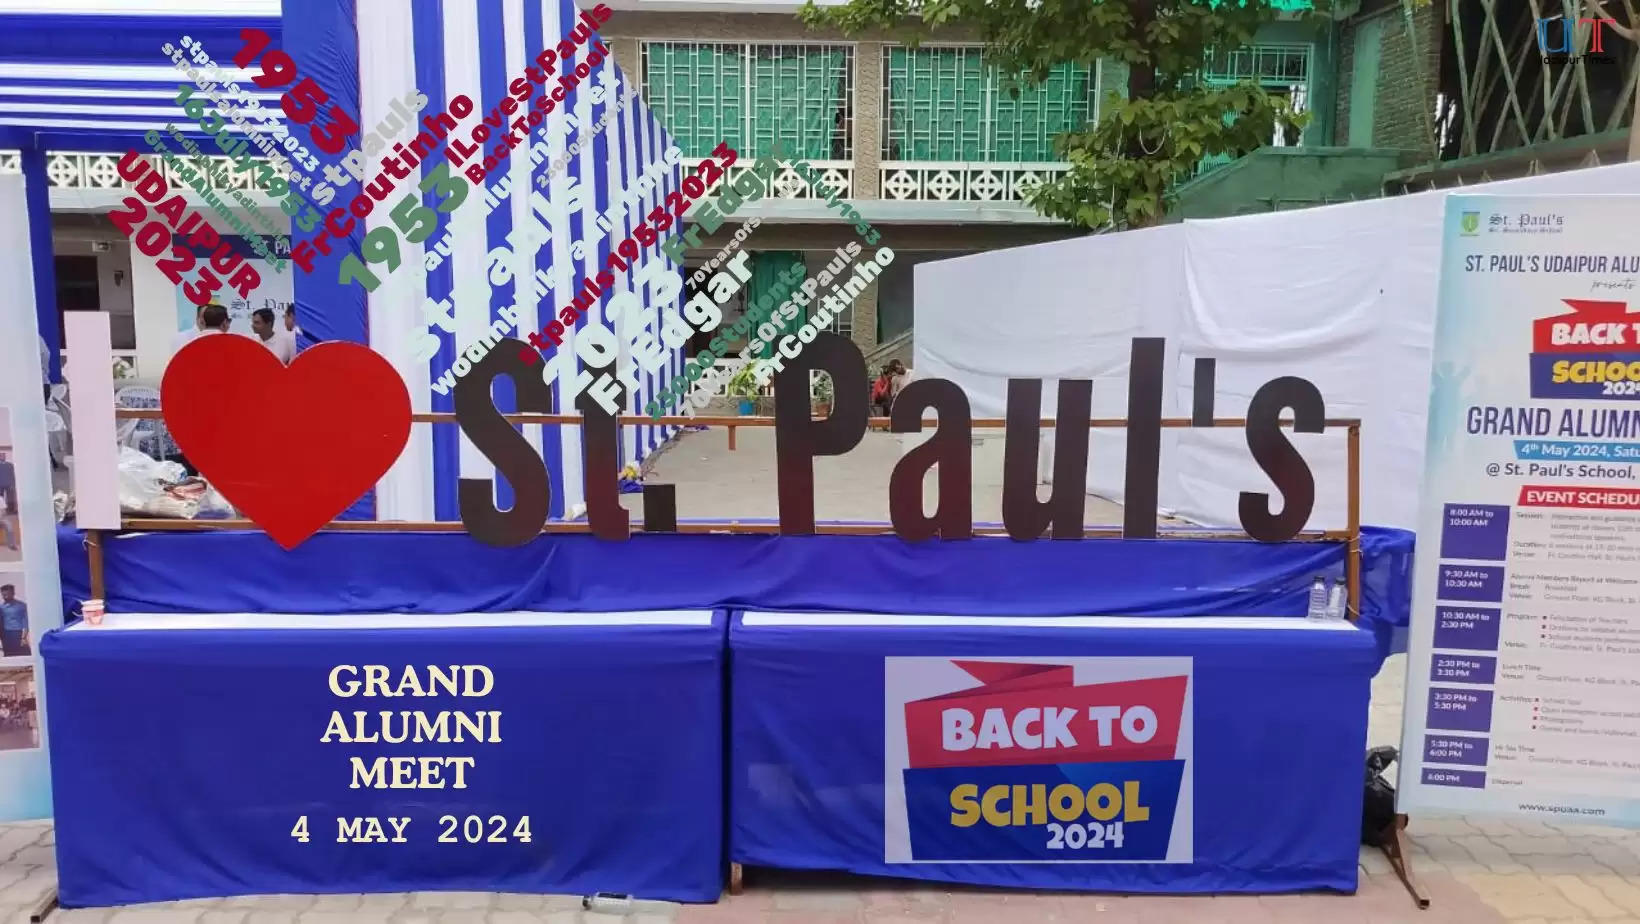 Udaipur St Pauls Alumni Meet Back To School 2024 70 years Batches from St pauls get together for Grand Alumni Meet